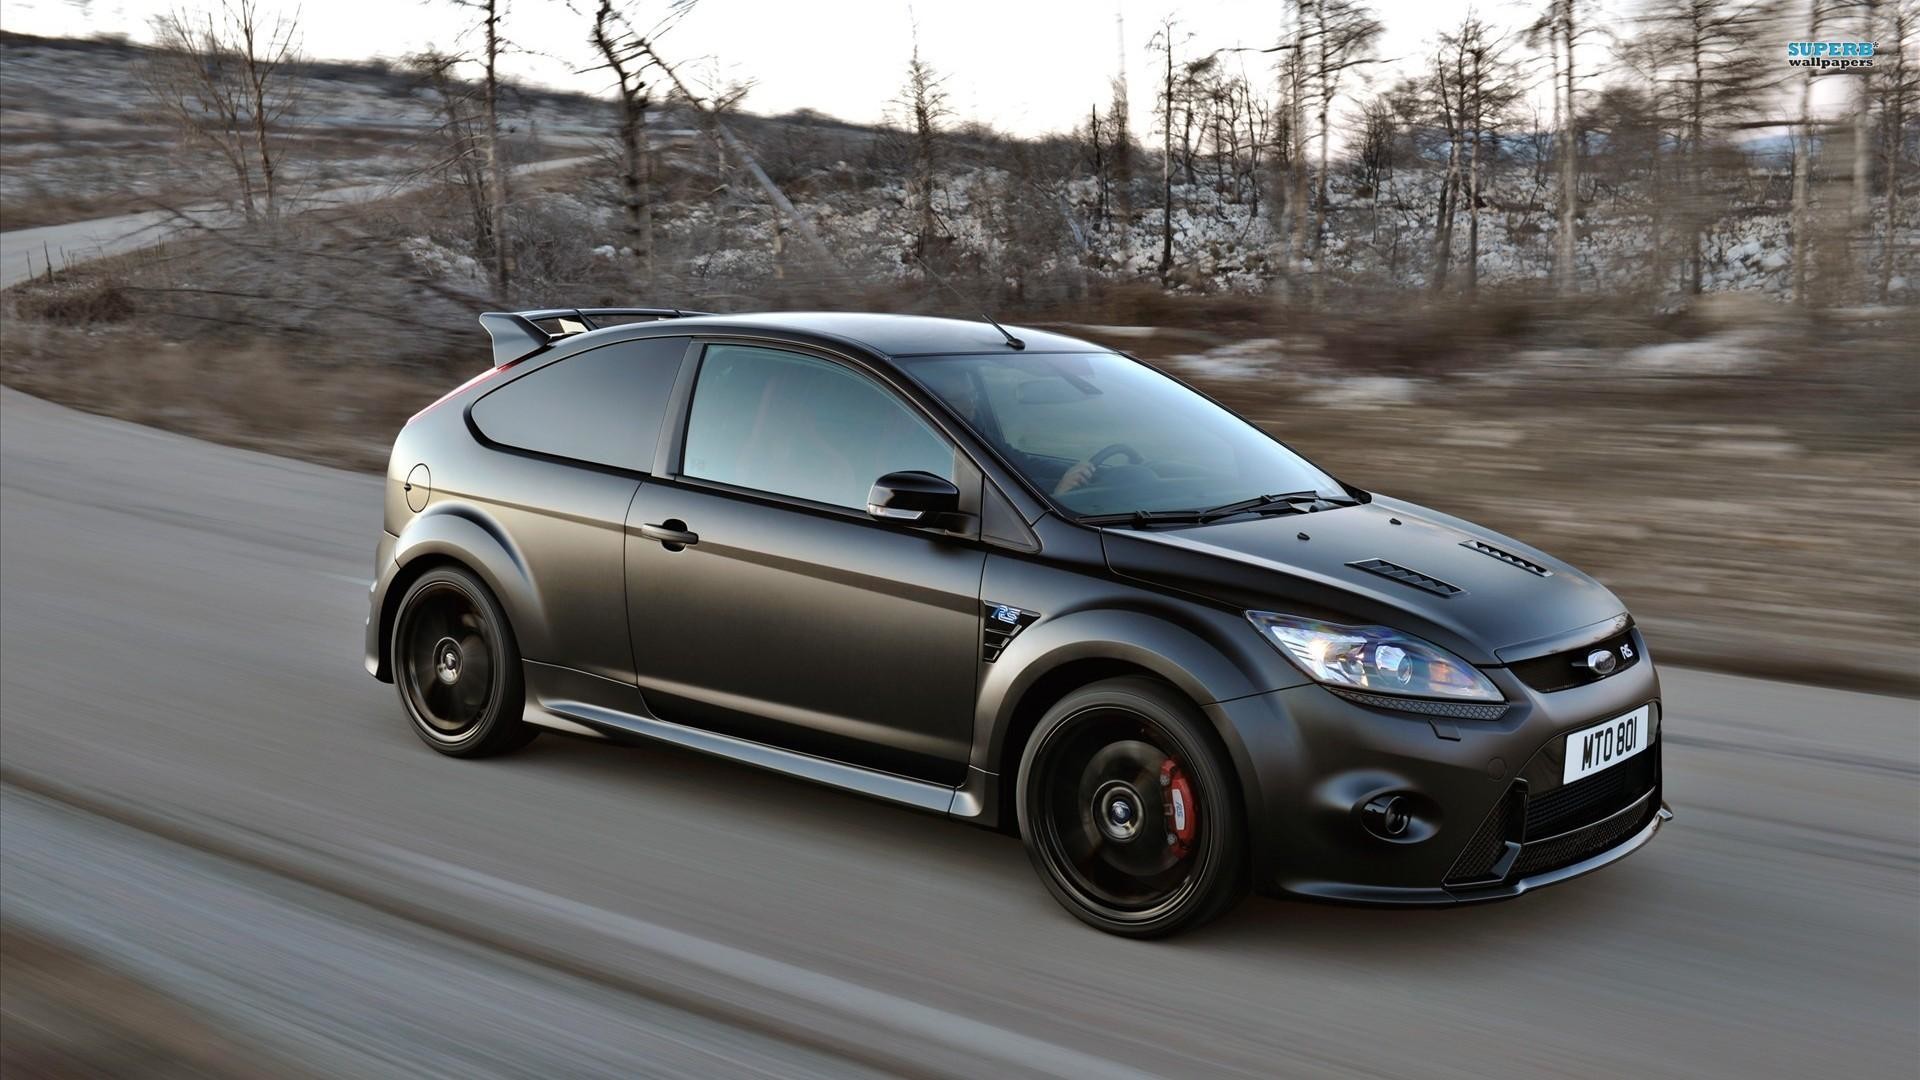 Download Ford Focus Rs Wallpapers, Ford Focus Rs HD Wallpapers for Free Desktop